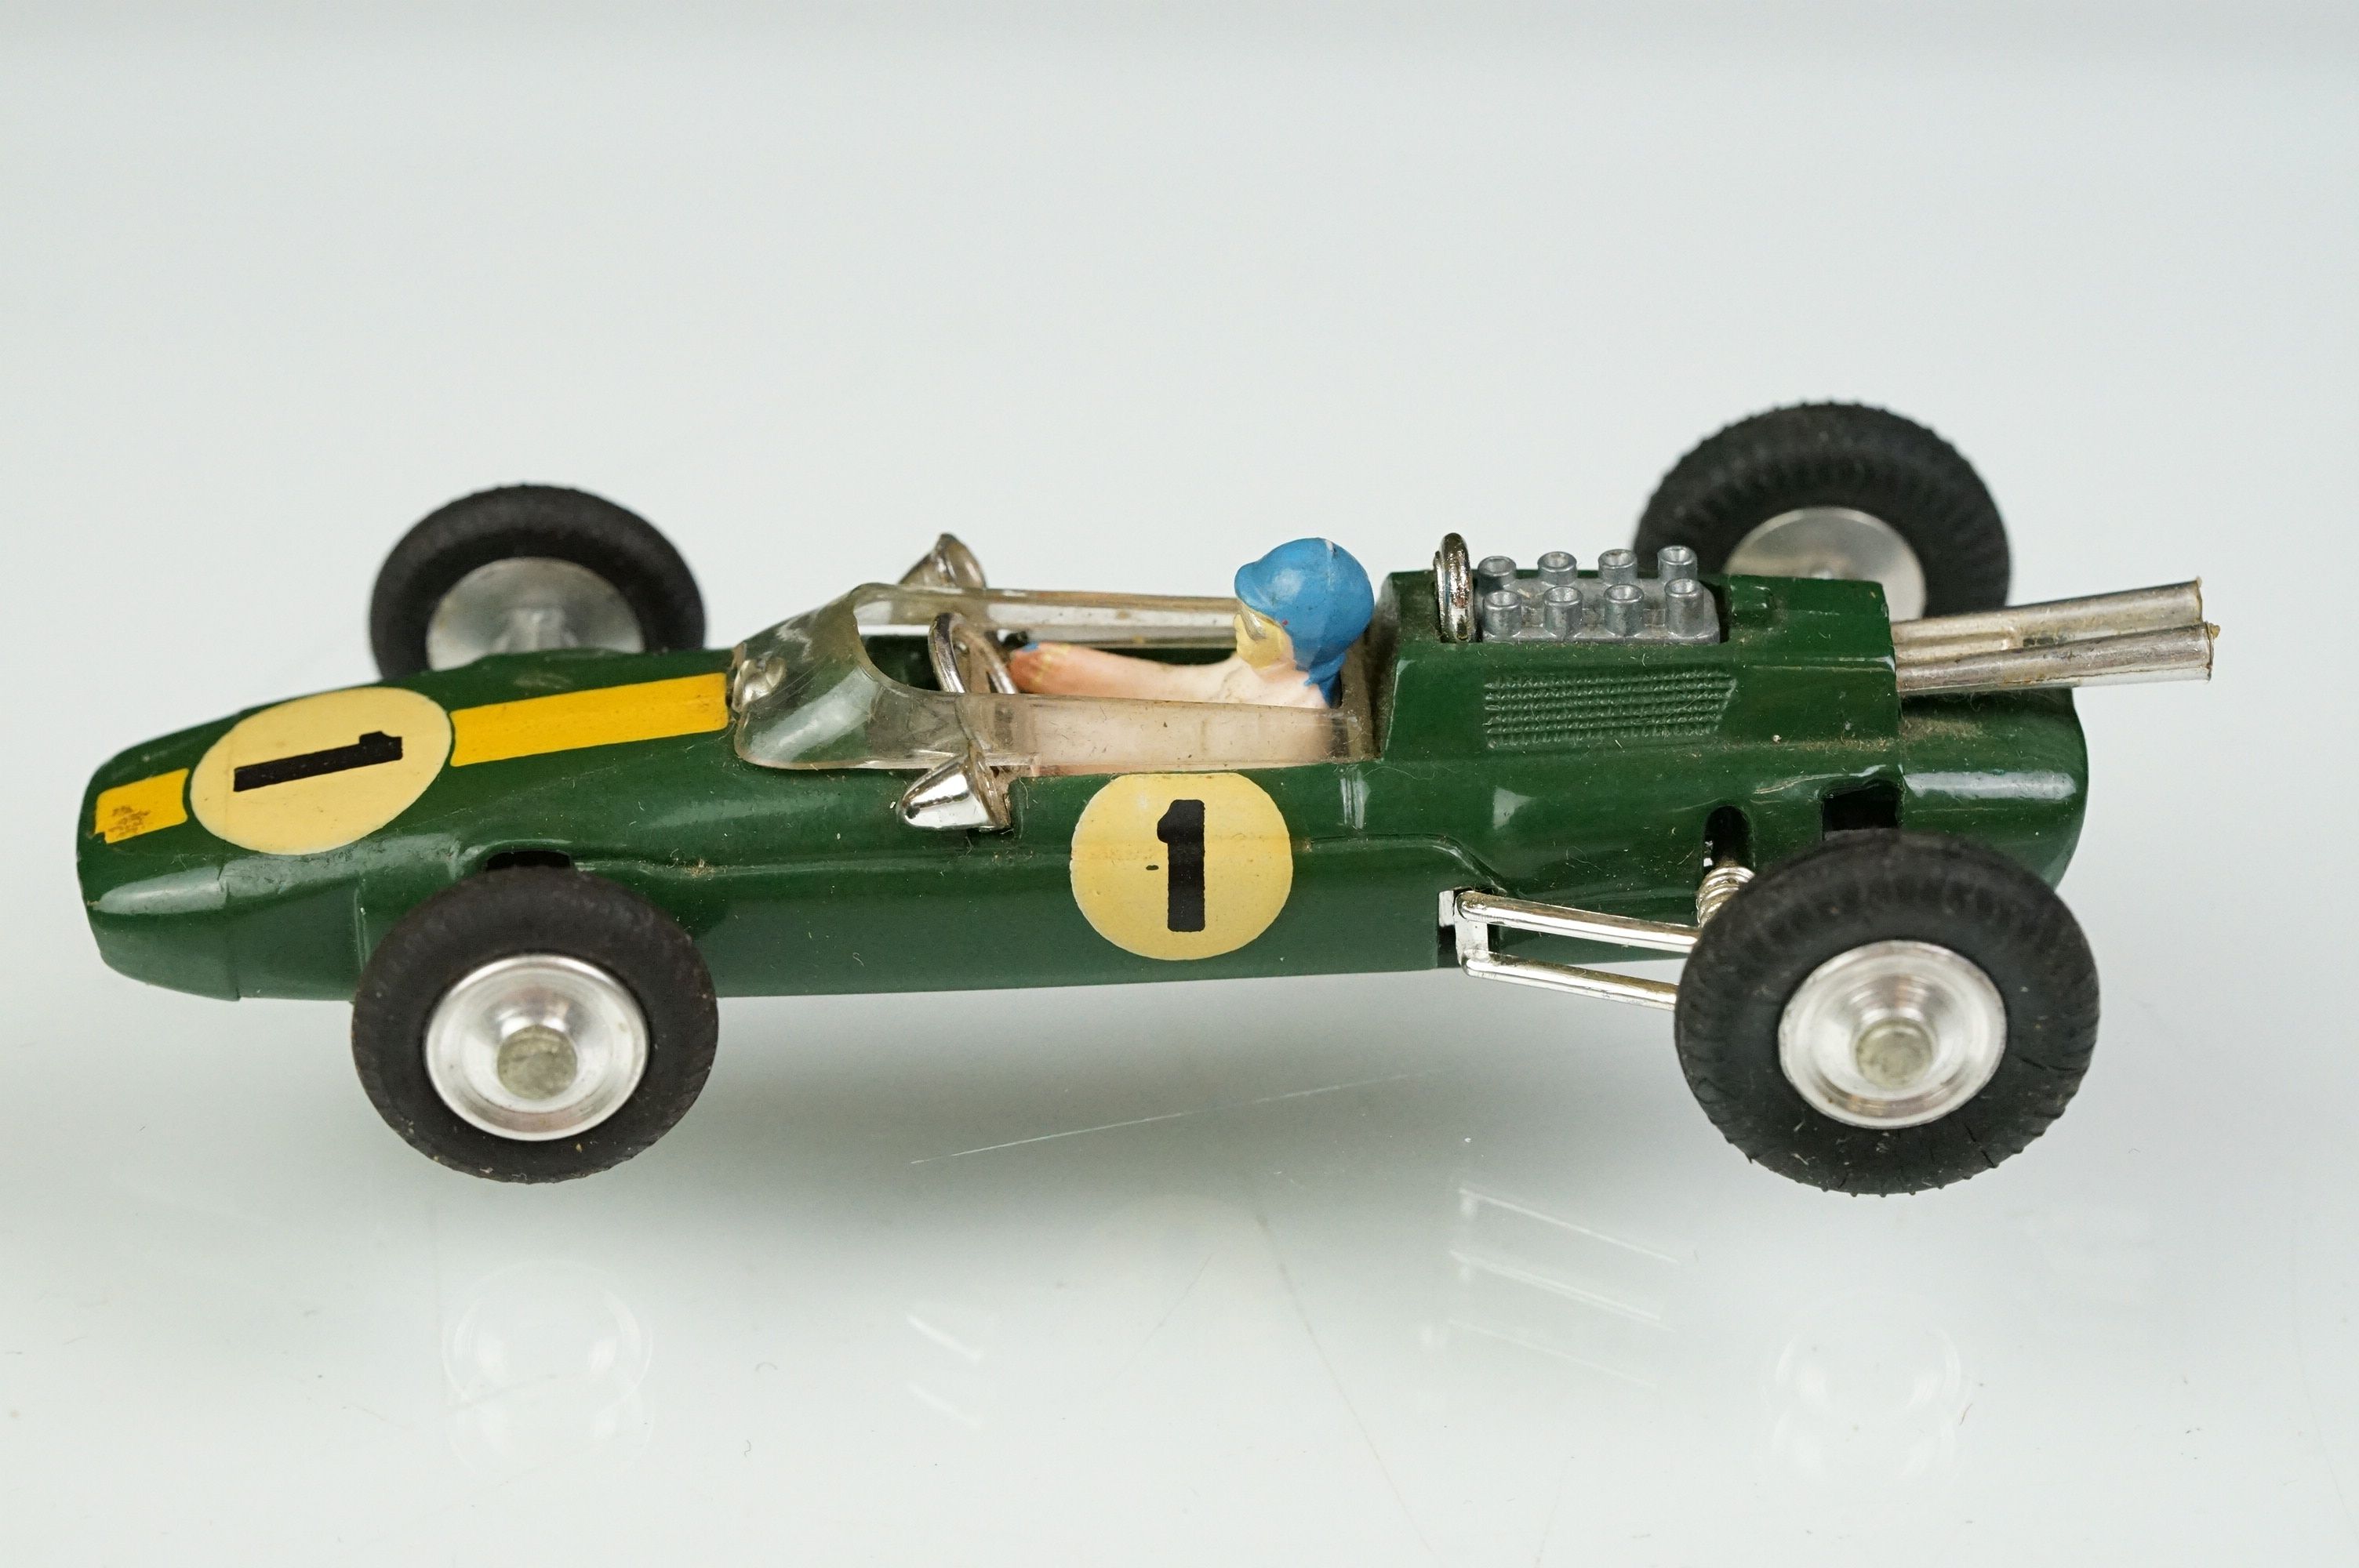 Four boxed Corgi diecast models to include 155 Lotus Climax Formula I Racing Car in green, 245 Buick - Image 31 of 39